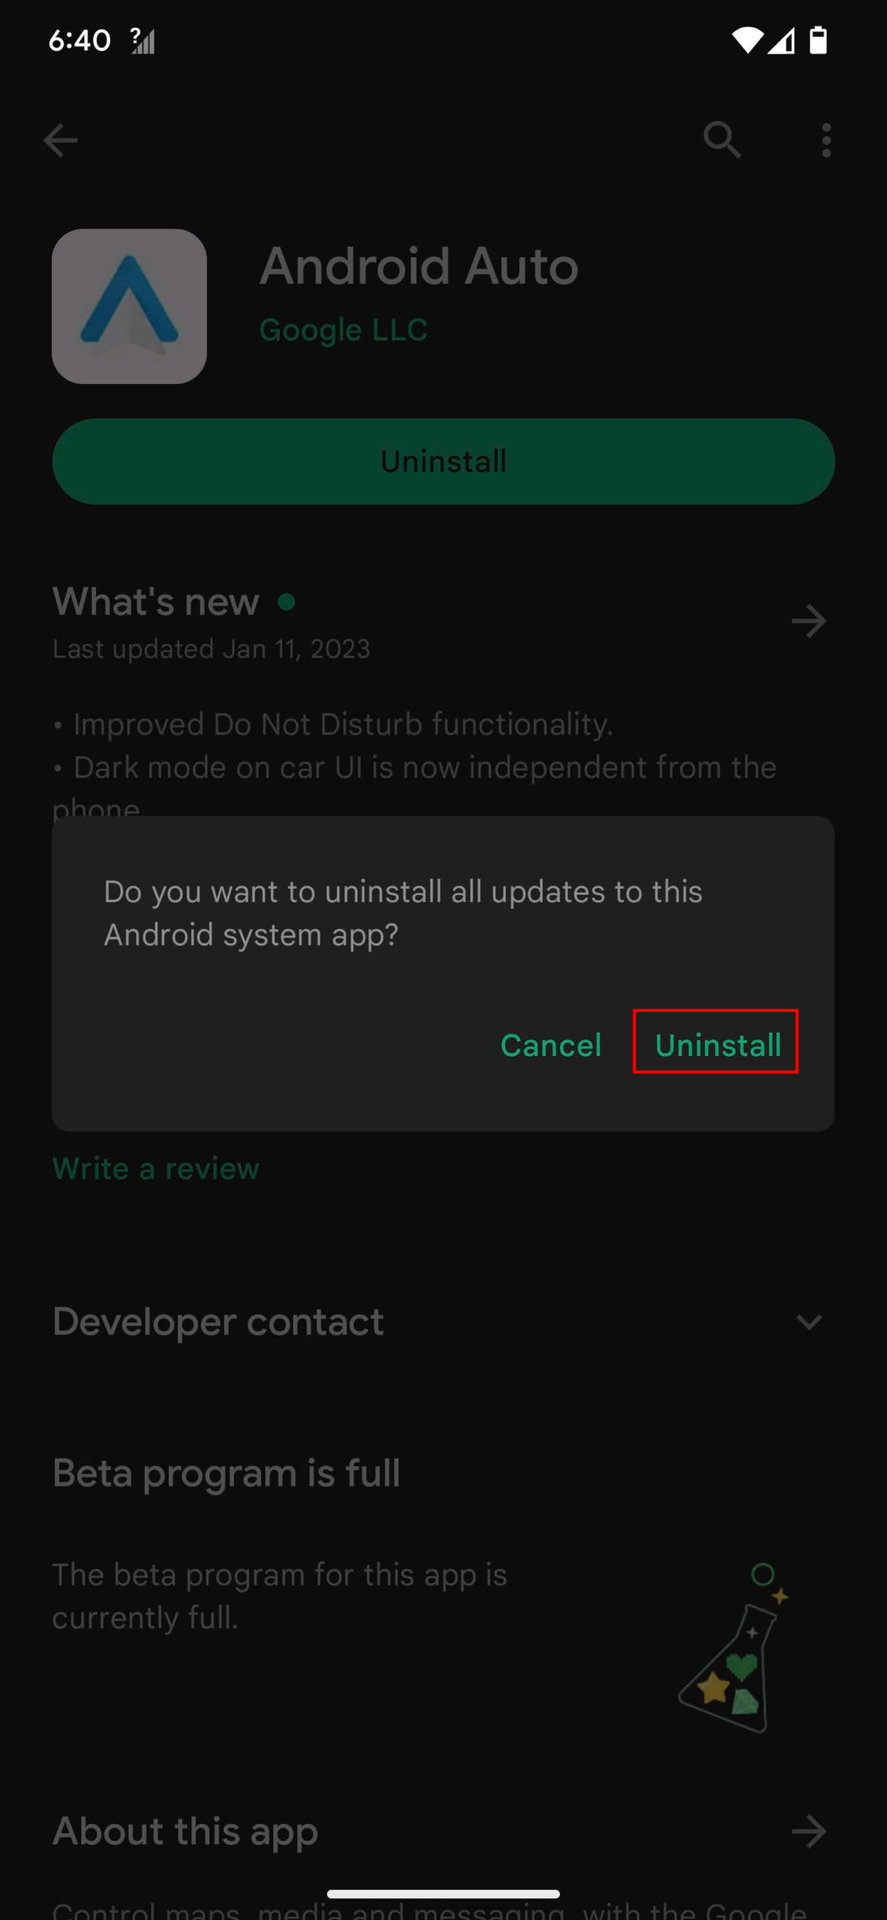 Uninstall and update Android Auto on Google Play Store 4